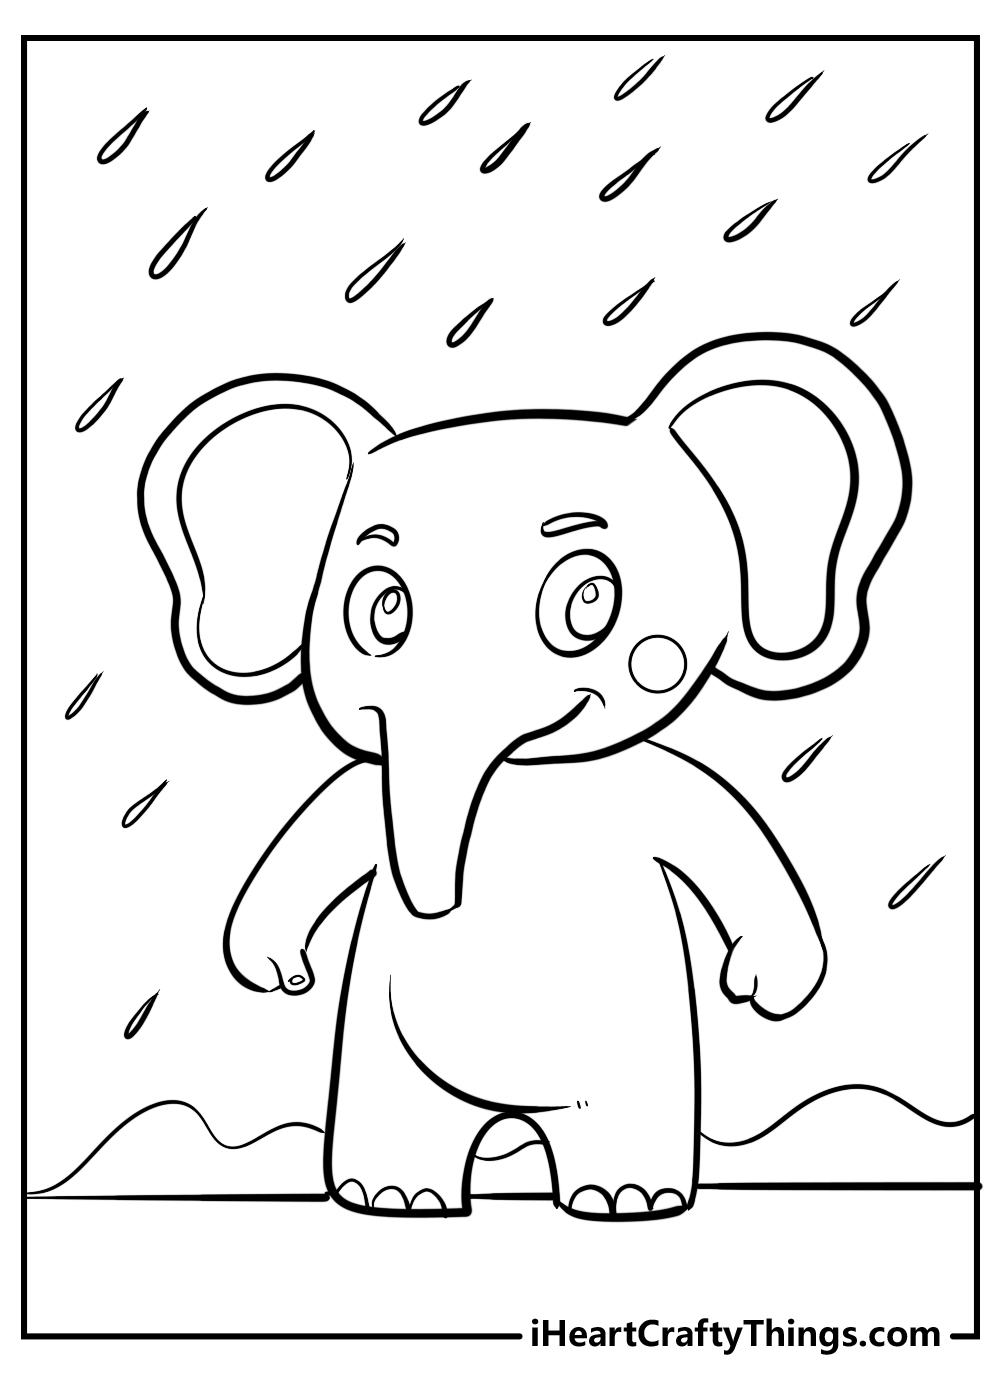 cocomelon coloring sheet free download